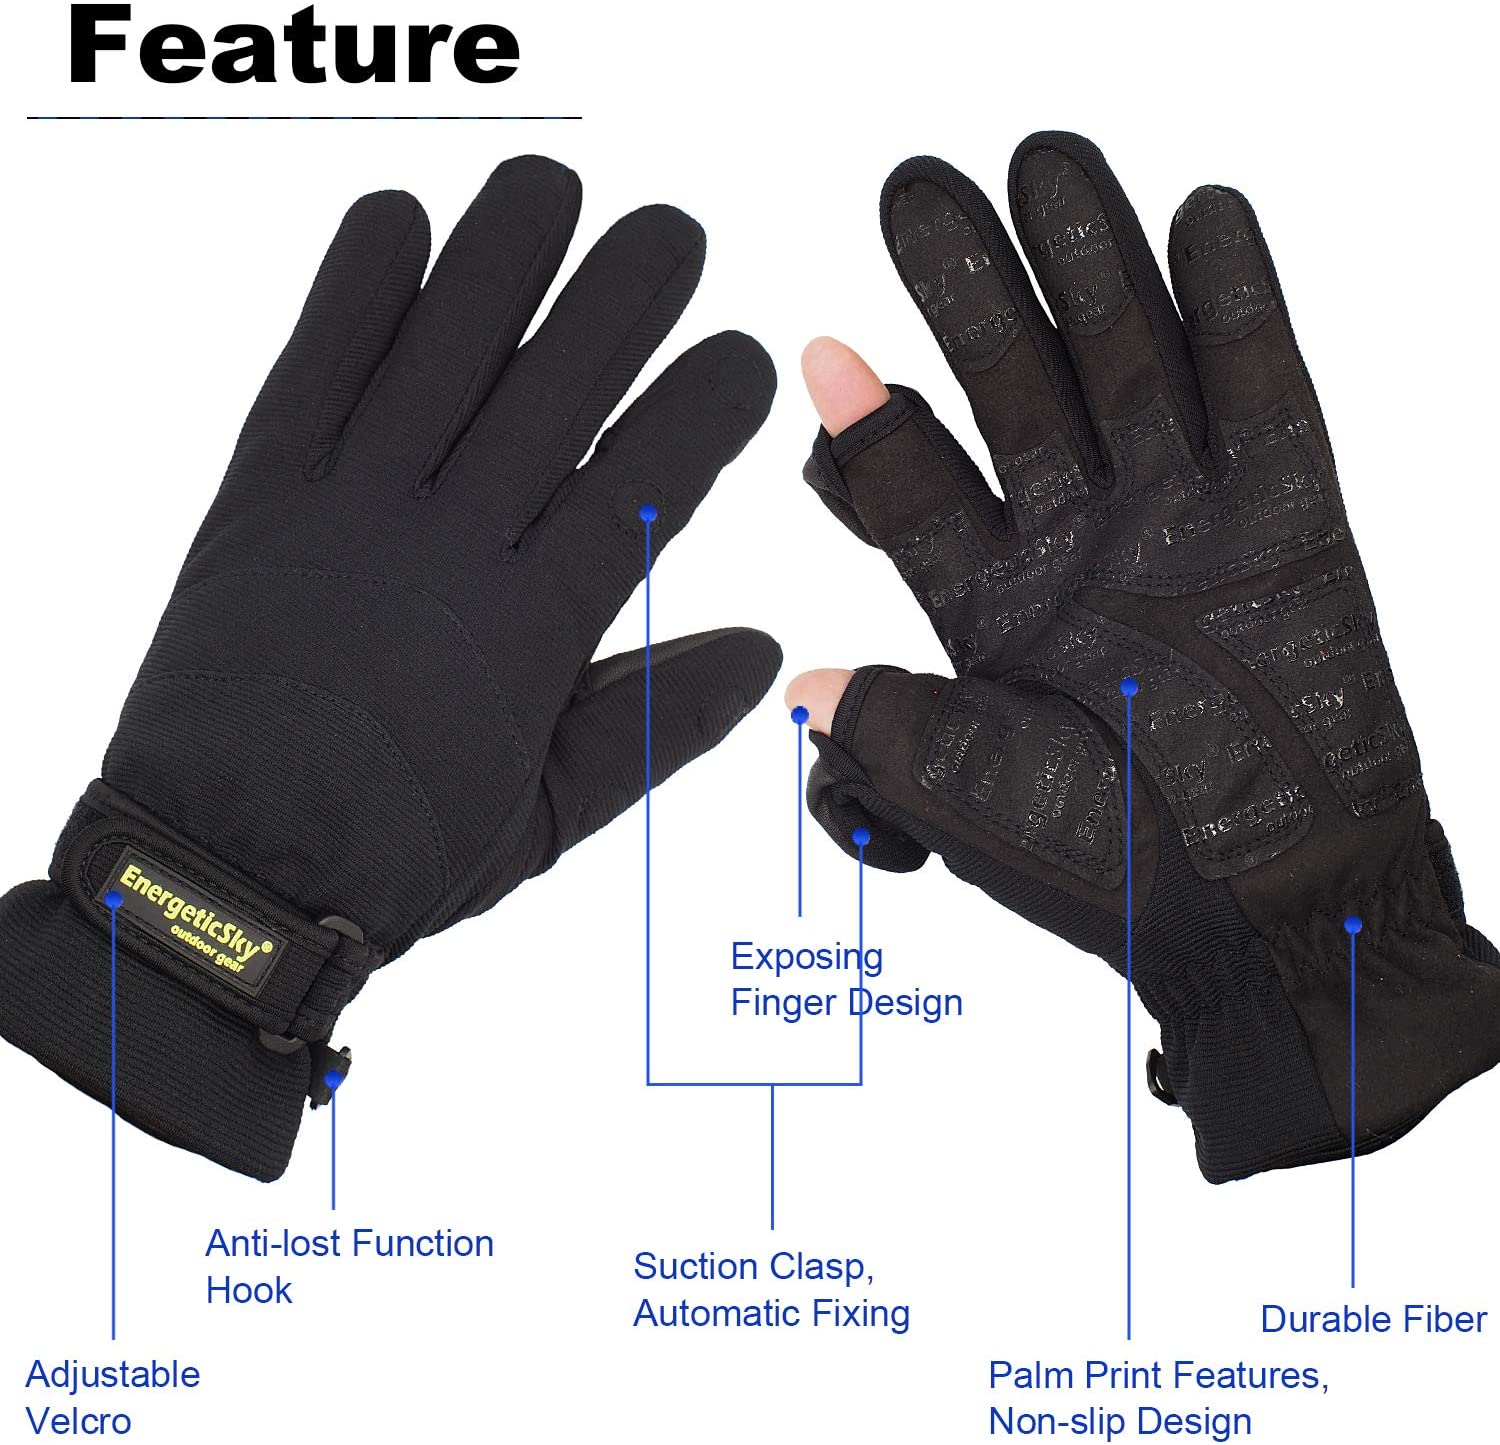 Waterproof Winter Gloves,Ski Gloves For Men And Women,Fishing,Photographing. - e4cents